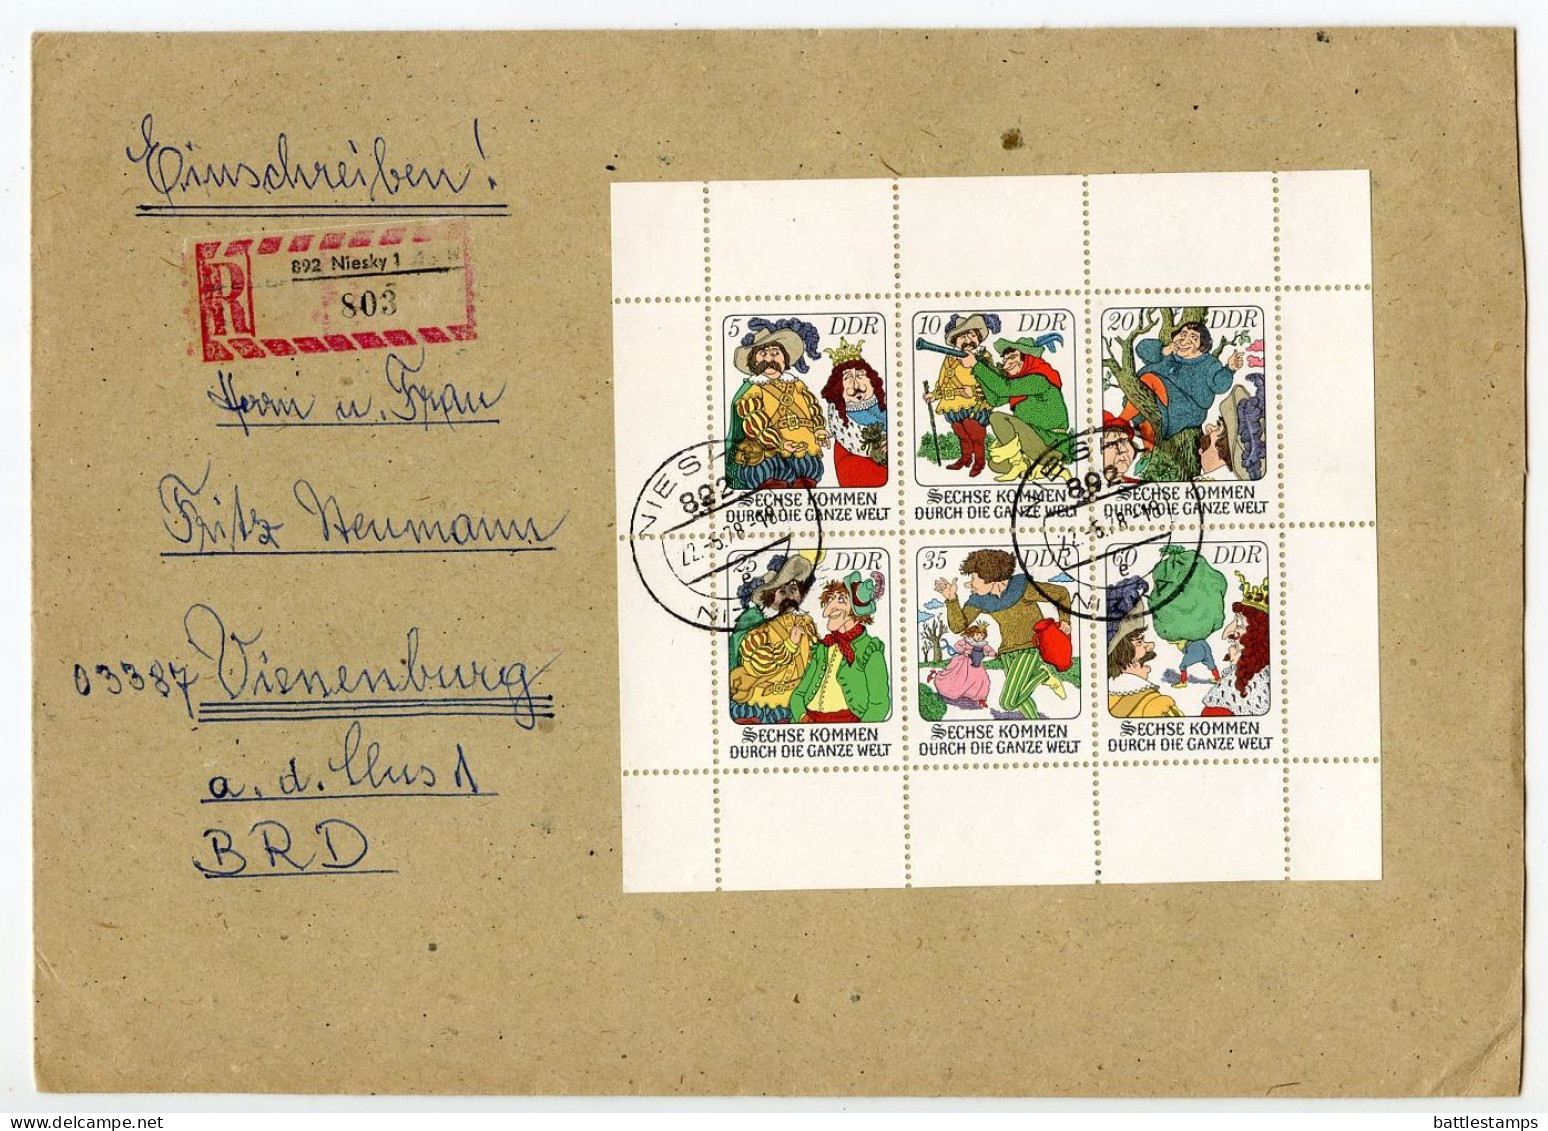 Germany, East 1978 Registered Cover; Niesky To Vienenburg; Stamps - Six Men Around The World Fairy Tale, Block Of 6 - Storia Postale